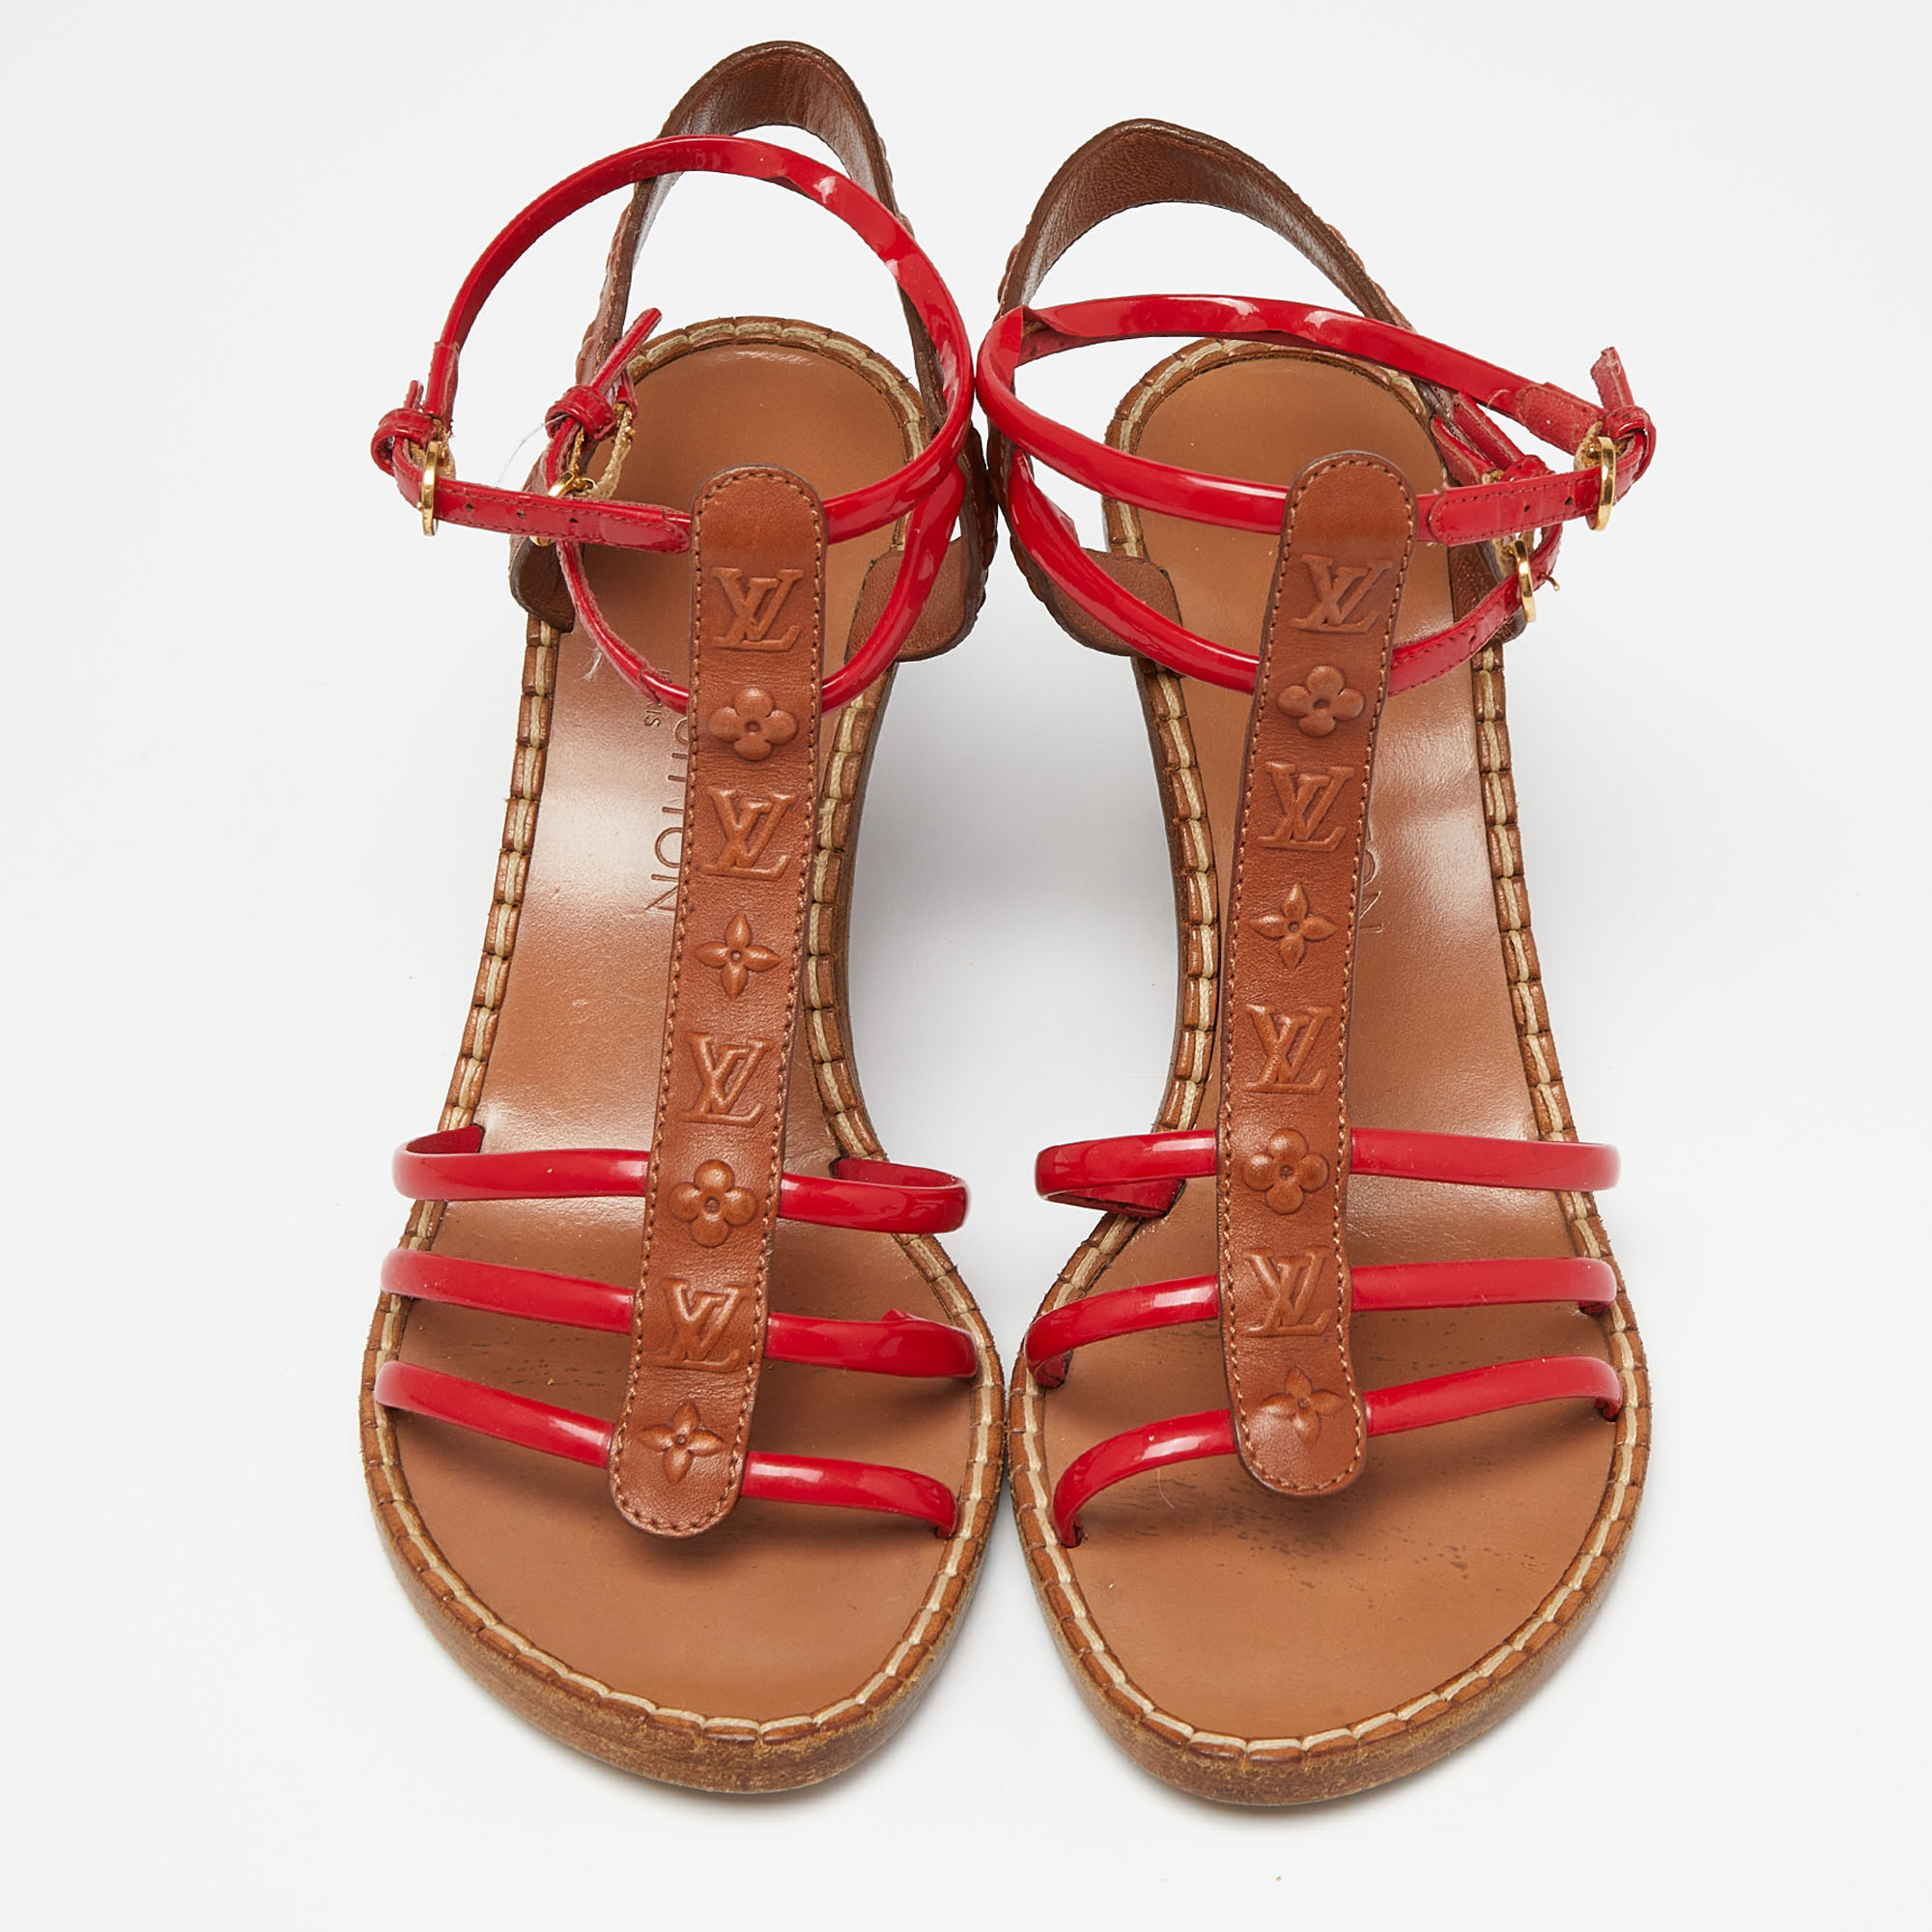 Louis Vuitton Brown/Red Monogram Embossed Leather And Patent T-Strap Wedge Sandals Size 37.5